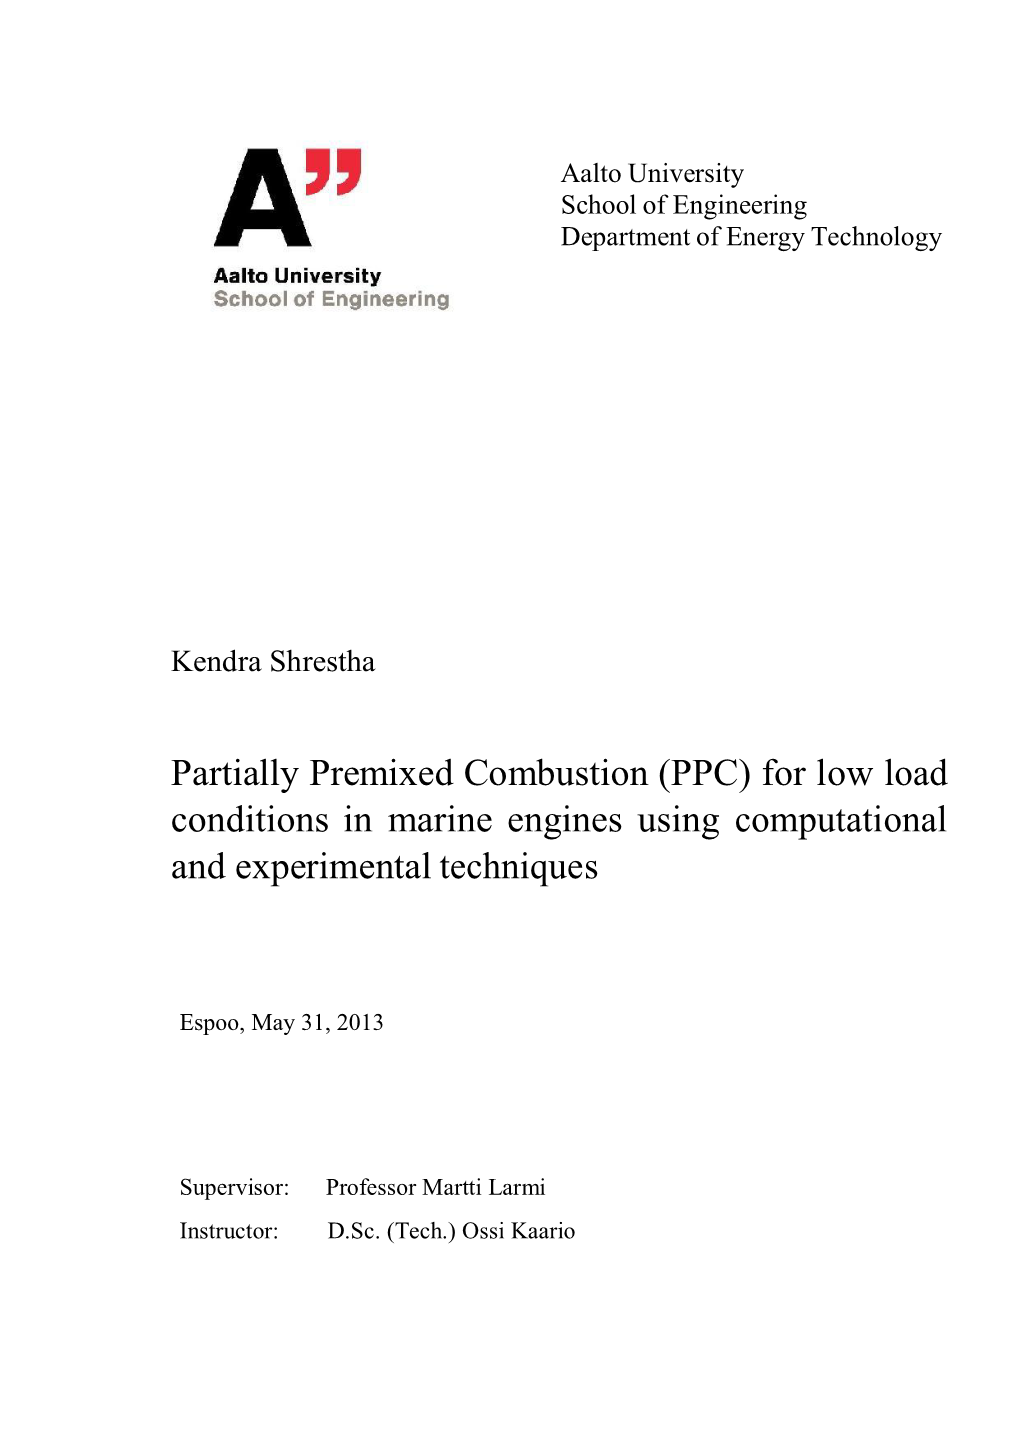 Partially Premixed Combustion (PPC) for Low Load Conditions in Marine Engines Using Computational and Experimental Techniques